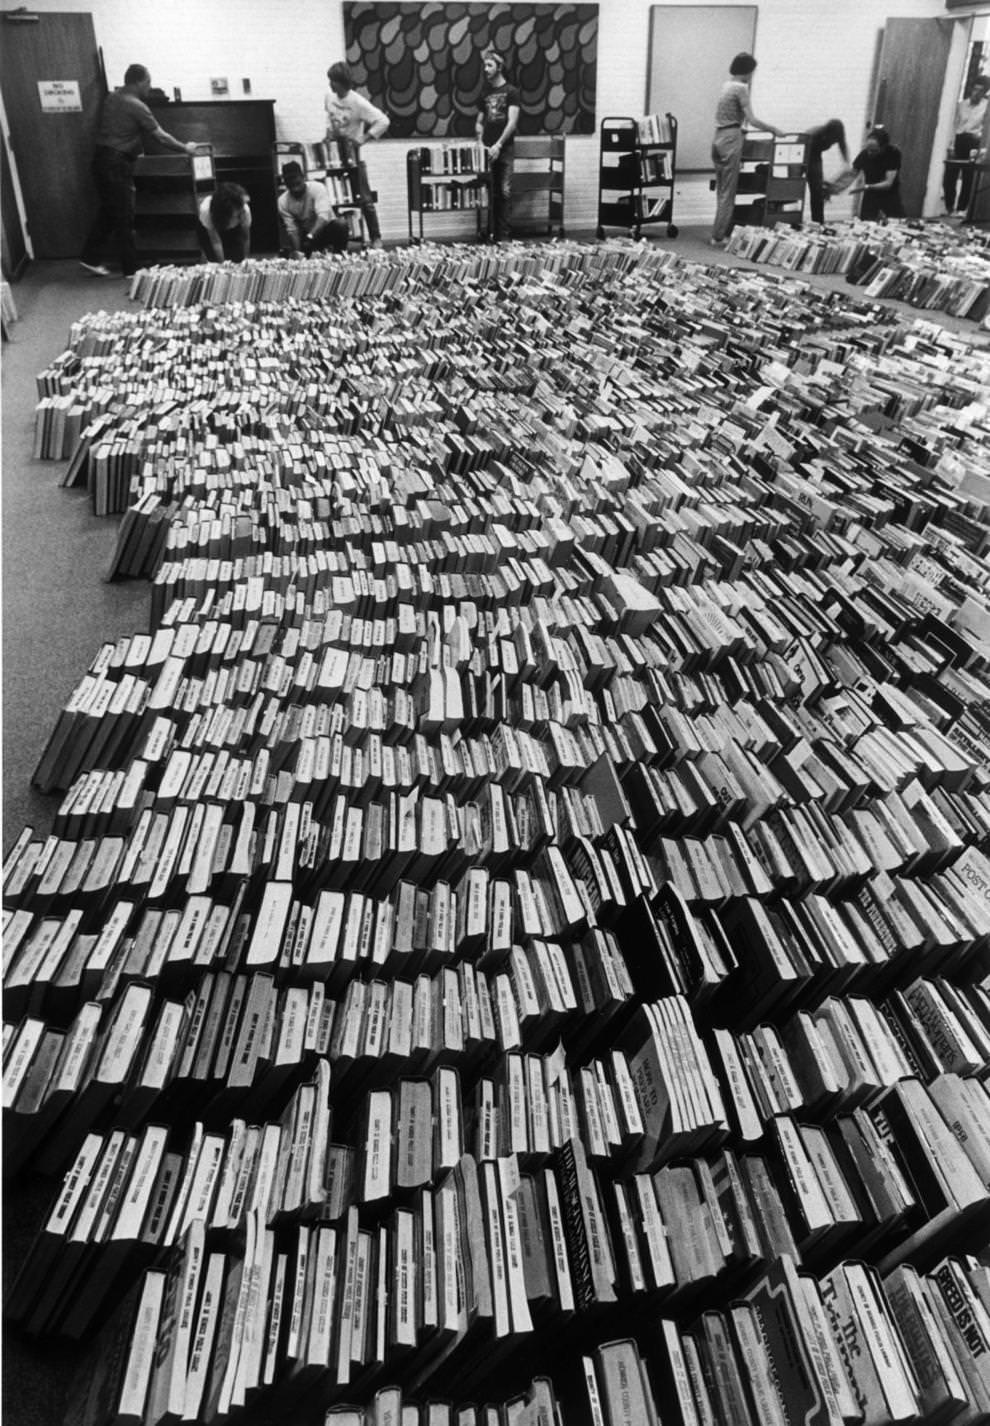 In preparation for new carpeting, the Dumbarton branch library in Henrico County had to remove about 80,000 books from shelves, 1987.